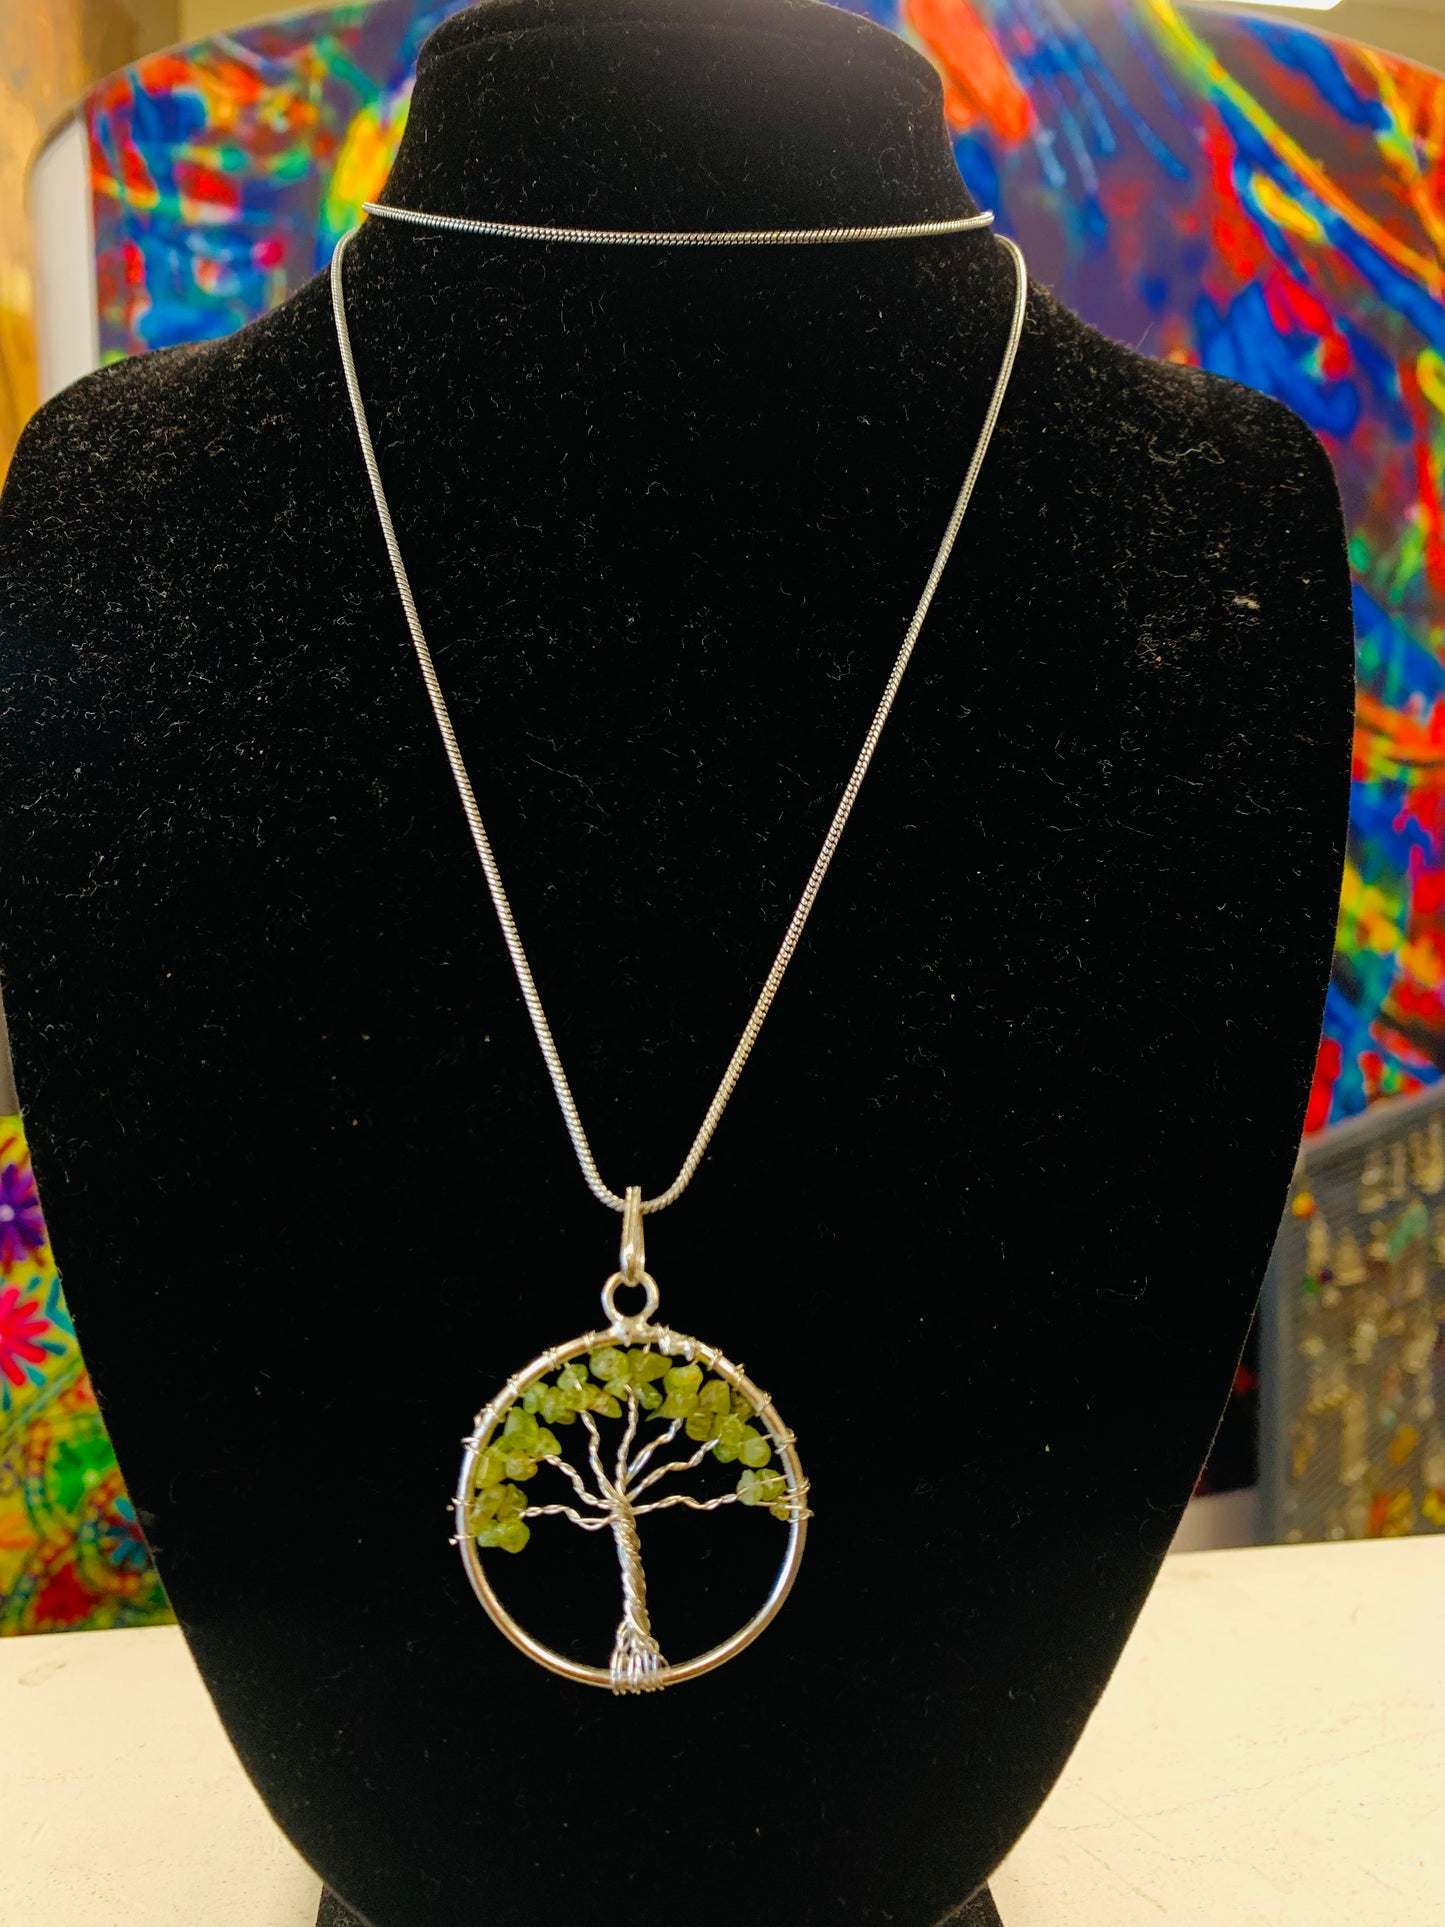 BOHEMIAN STYLE HANDCRAFTED TREE OF LIFE NECKLACE #11204